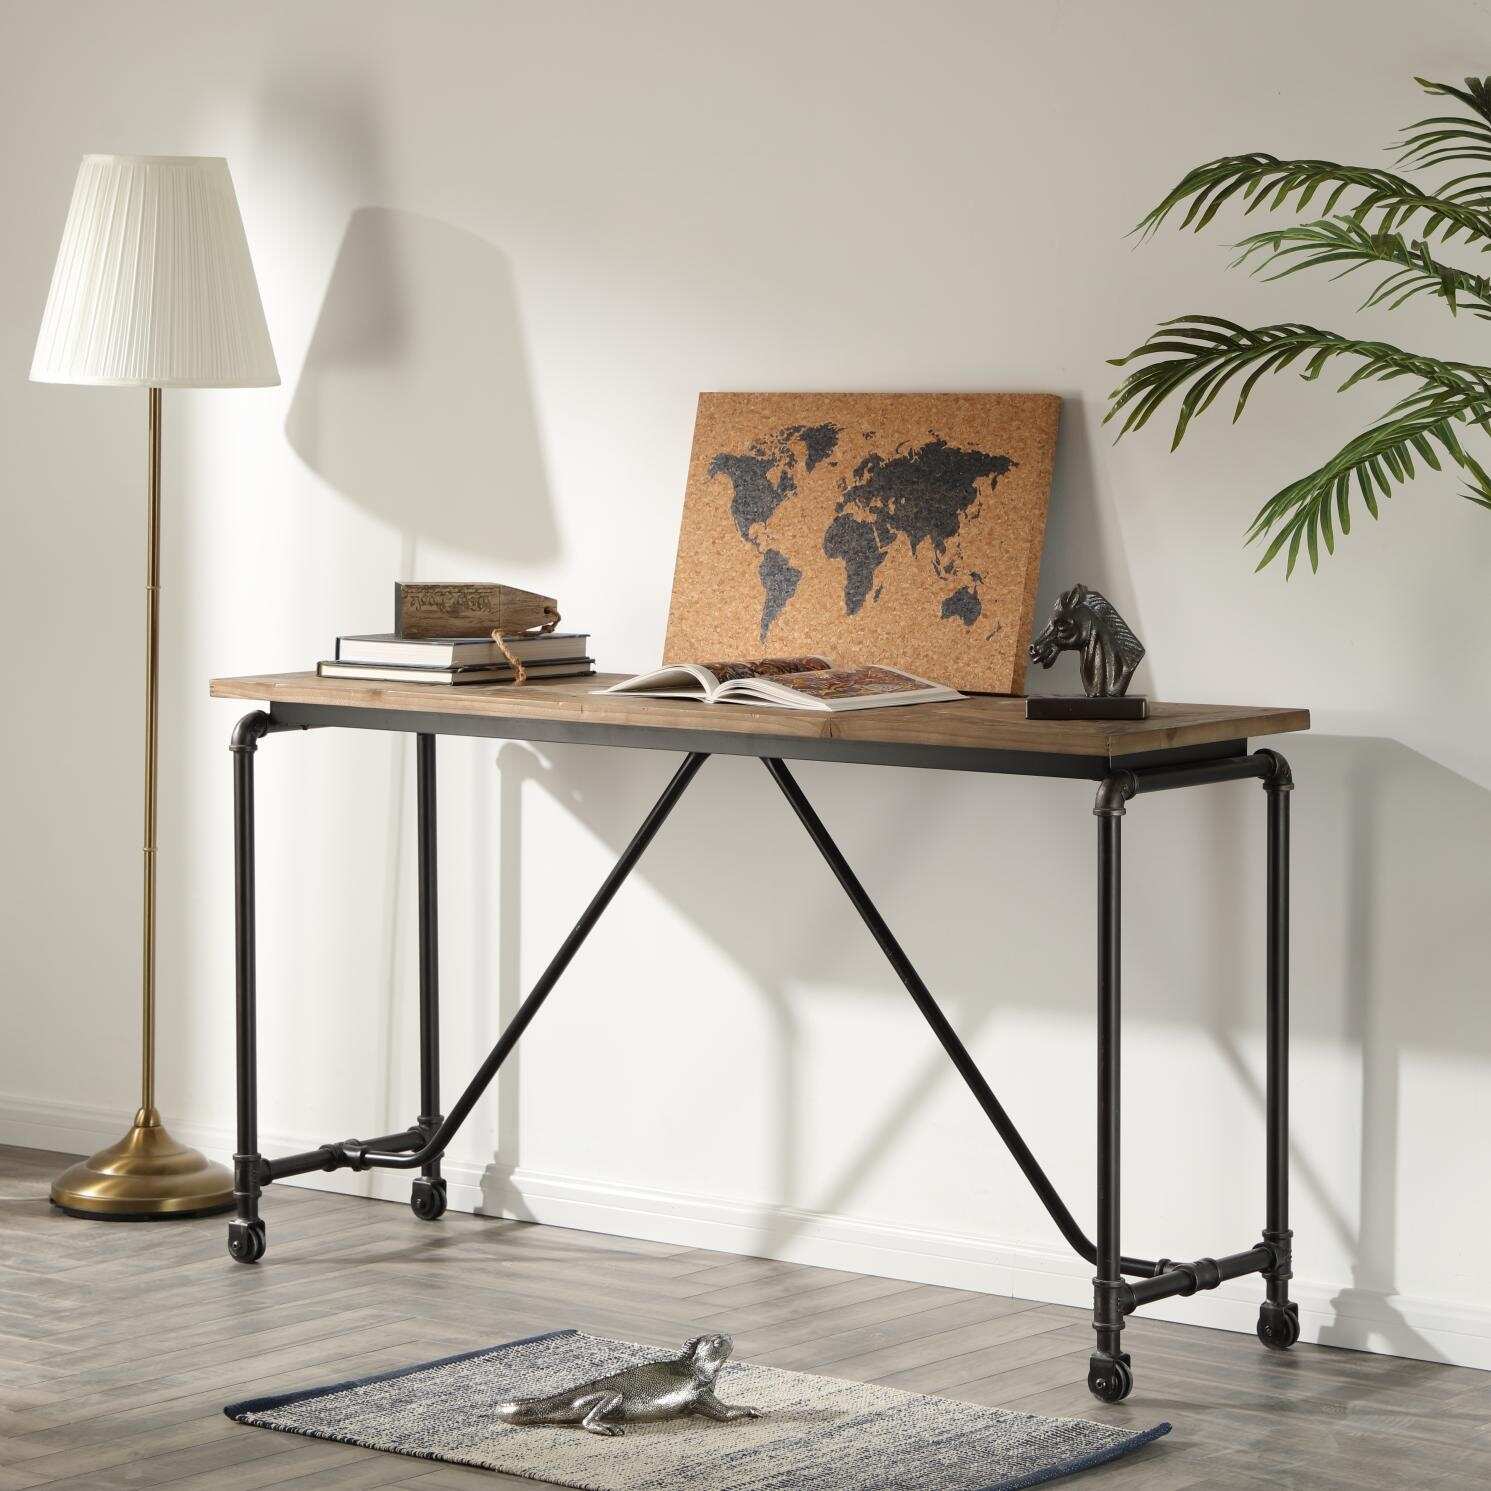 Cornelia Industrial Metal and Wood Console Table